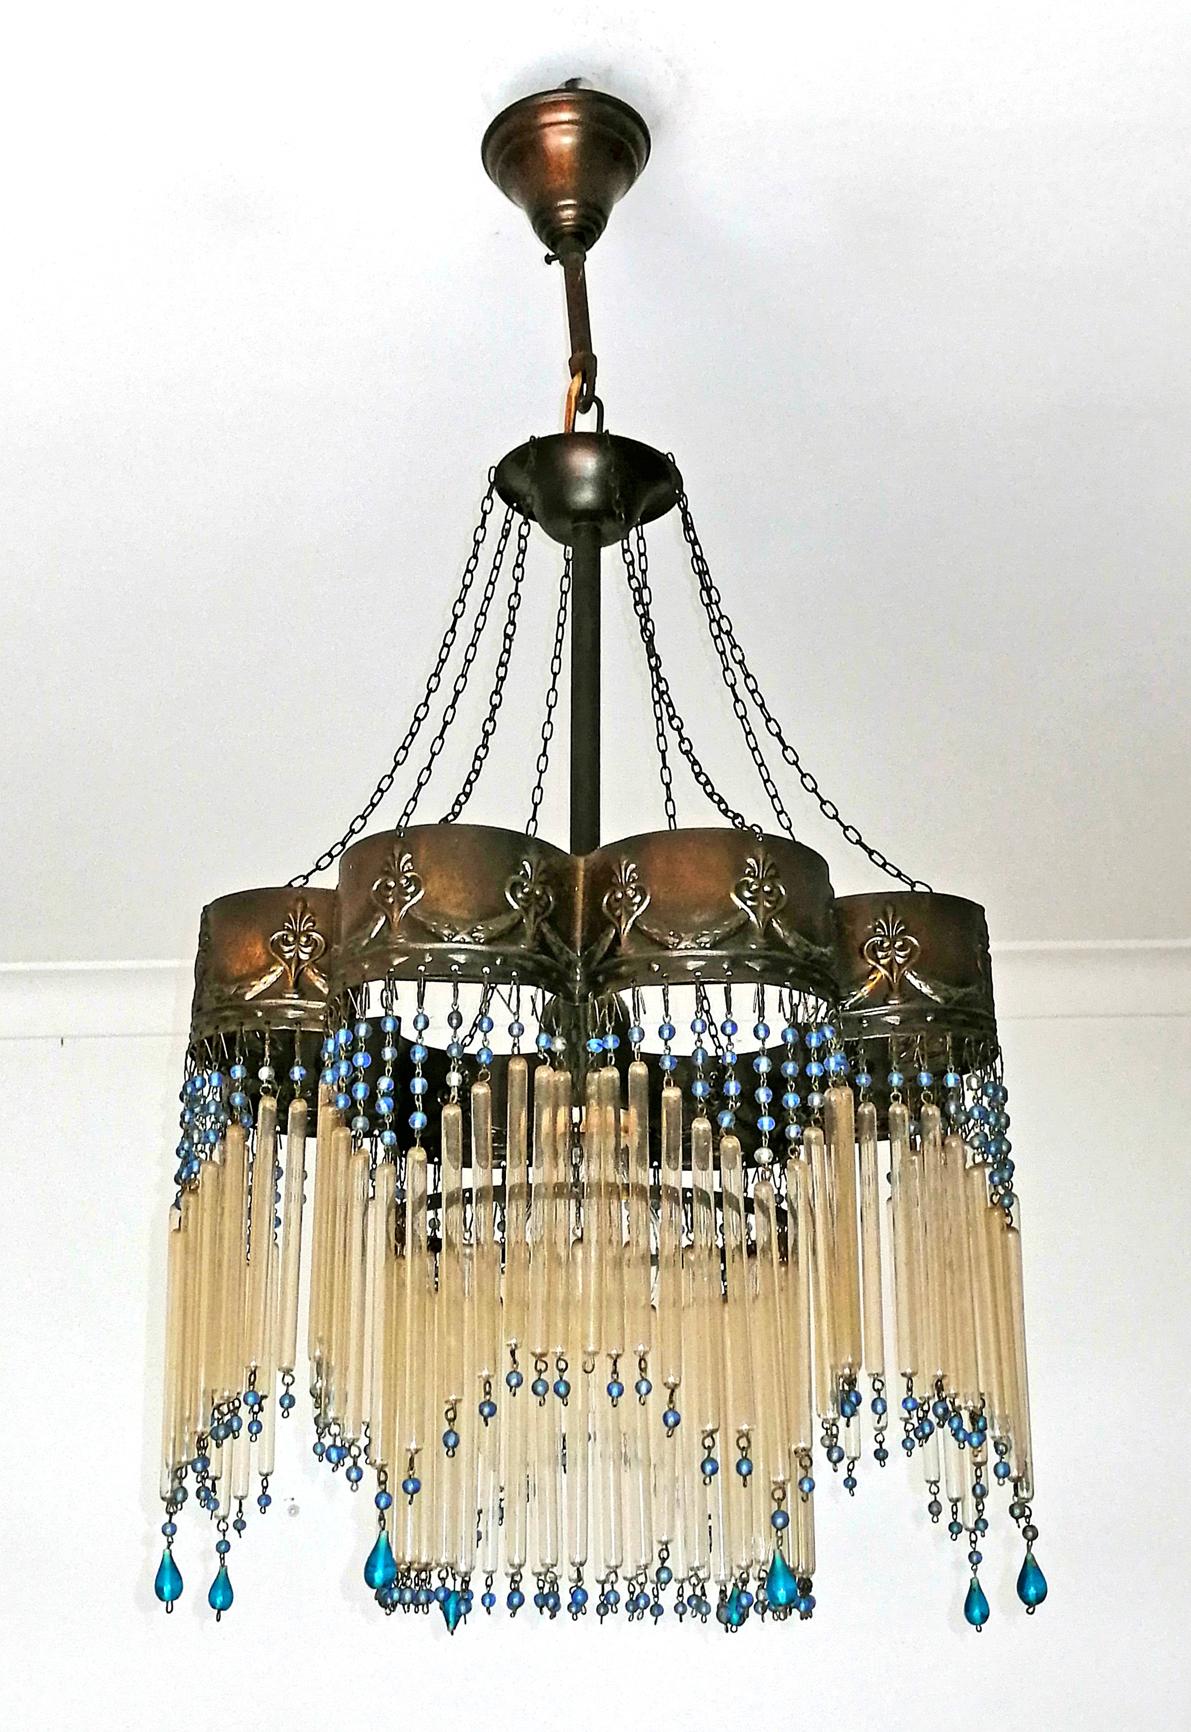 French midcentury Art Deco/Art Nouveau chandelier in amber blue beaded glass.
Measures: Diameter 33 cm
Height 66 cm.
One-light bulb E27 / Good working condition/European wiring.
Your item will be carefully packed. Assembly required. Bulbs not